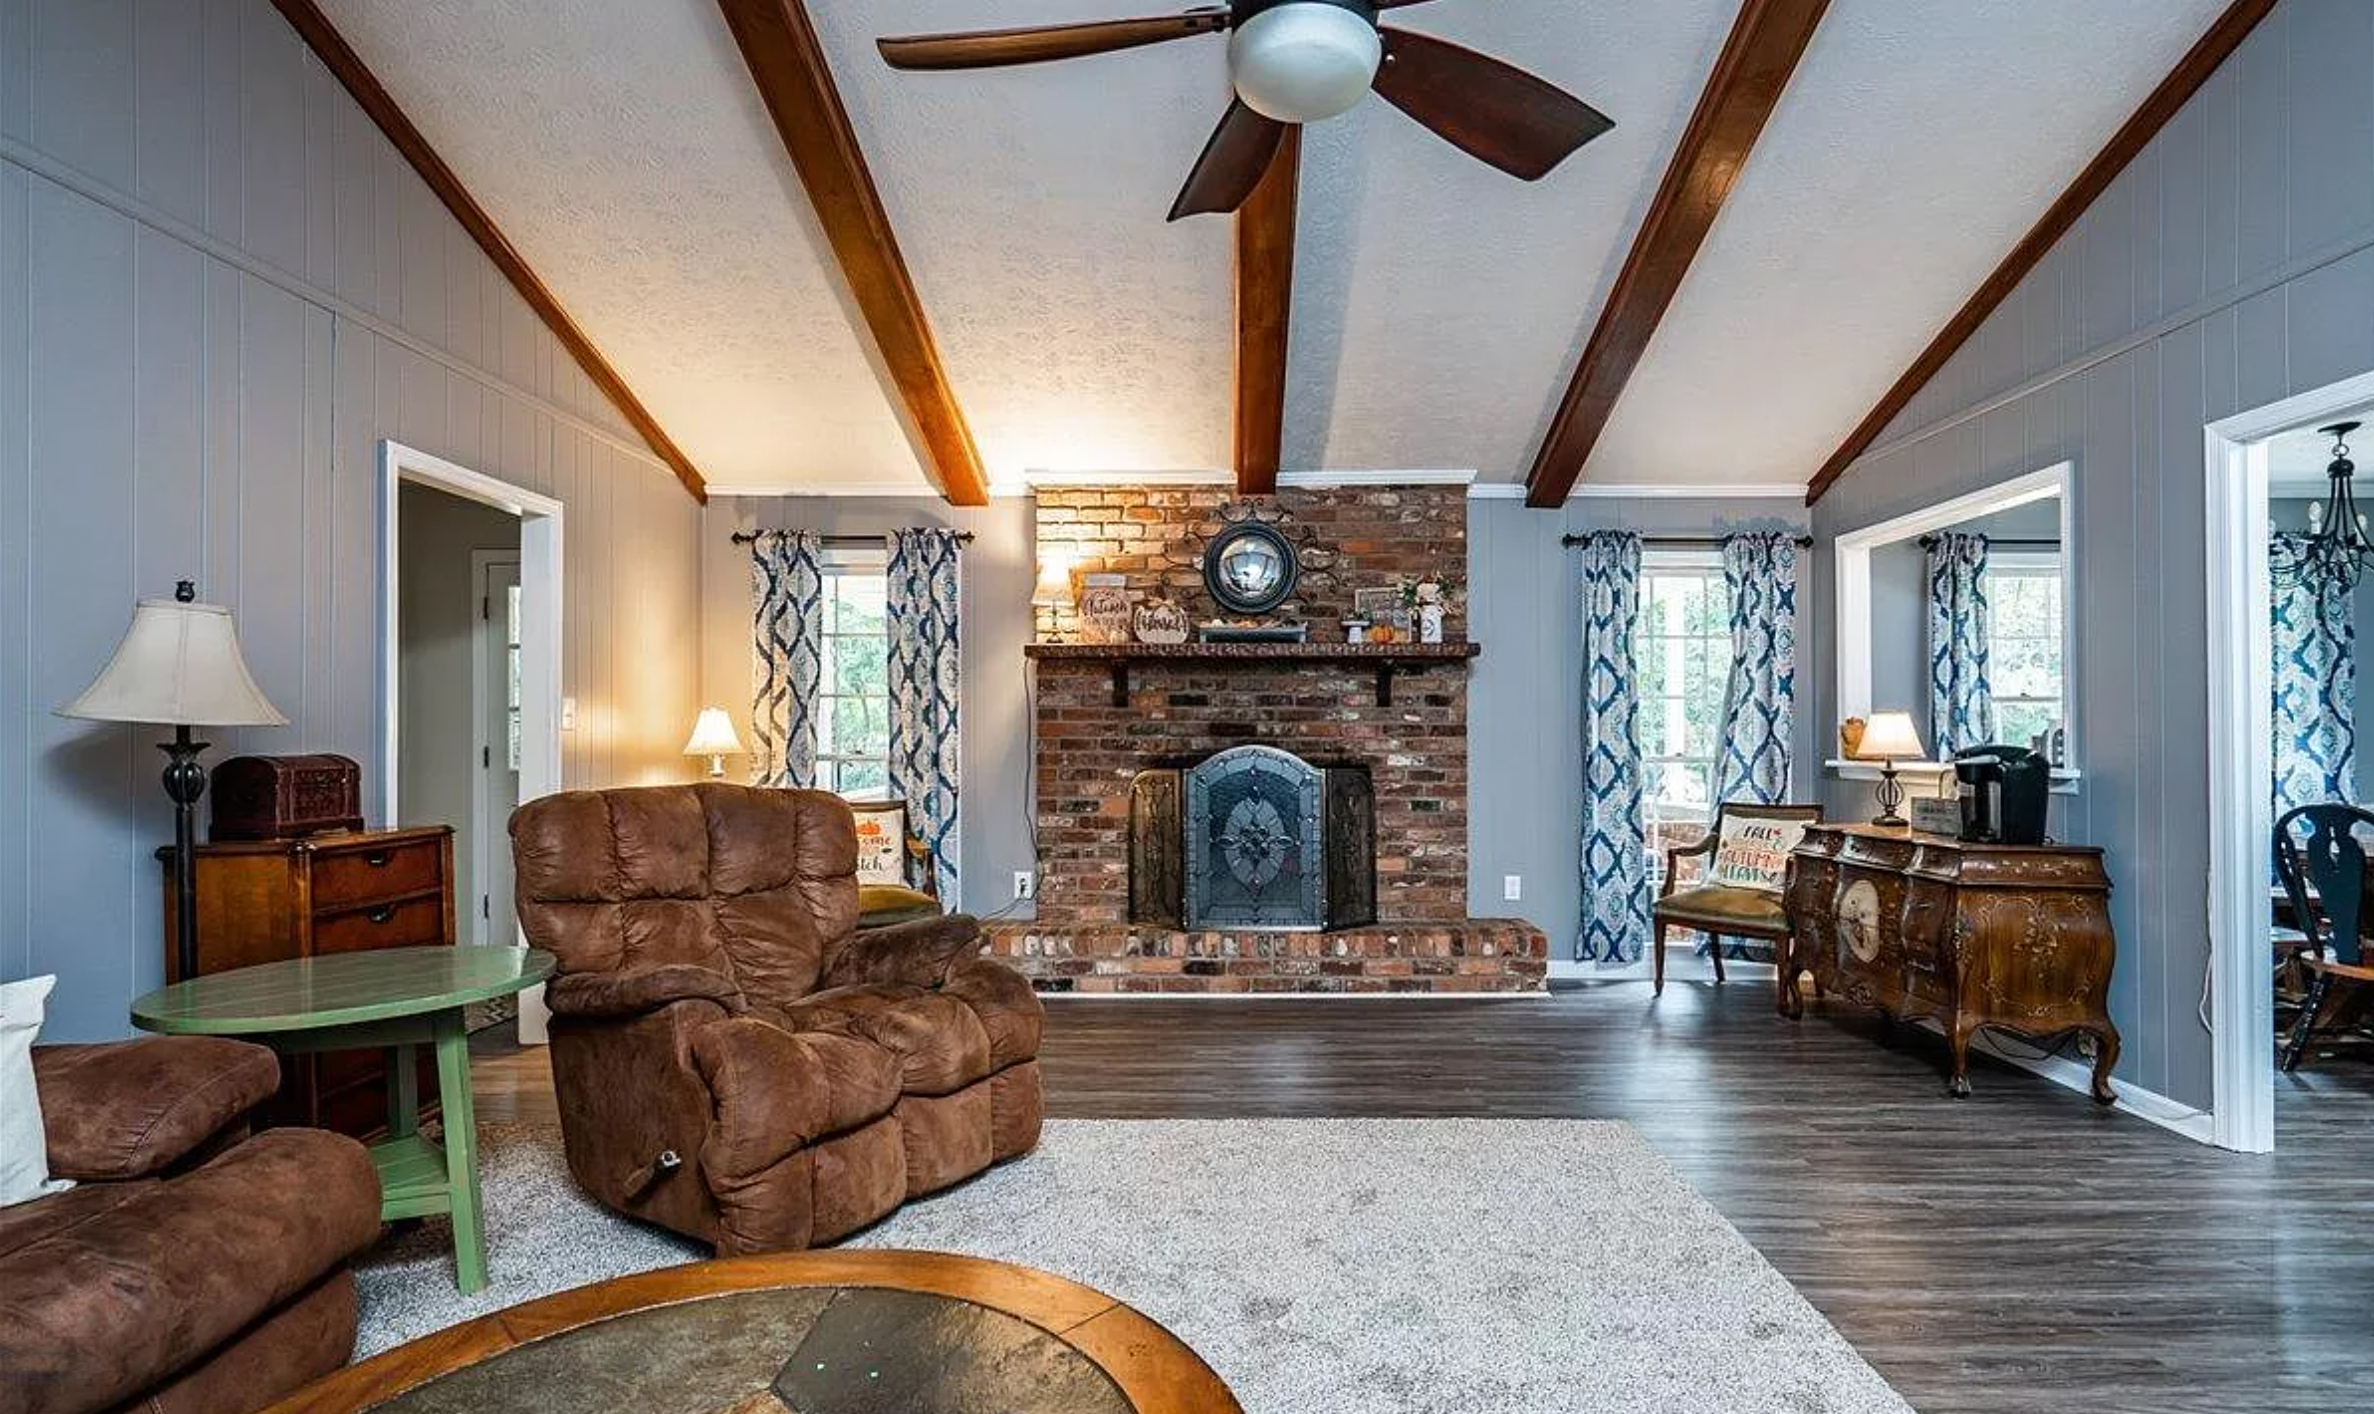 Her home has a brick fireplace and wood beams in the living room